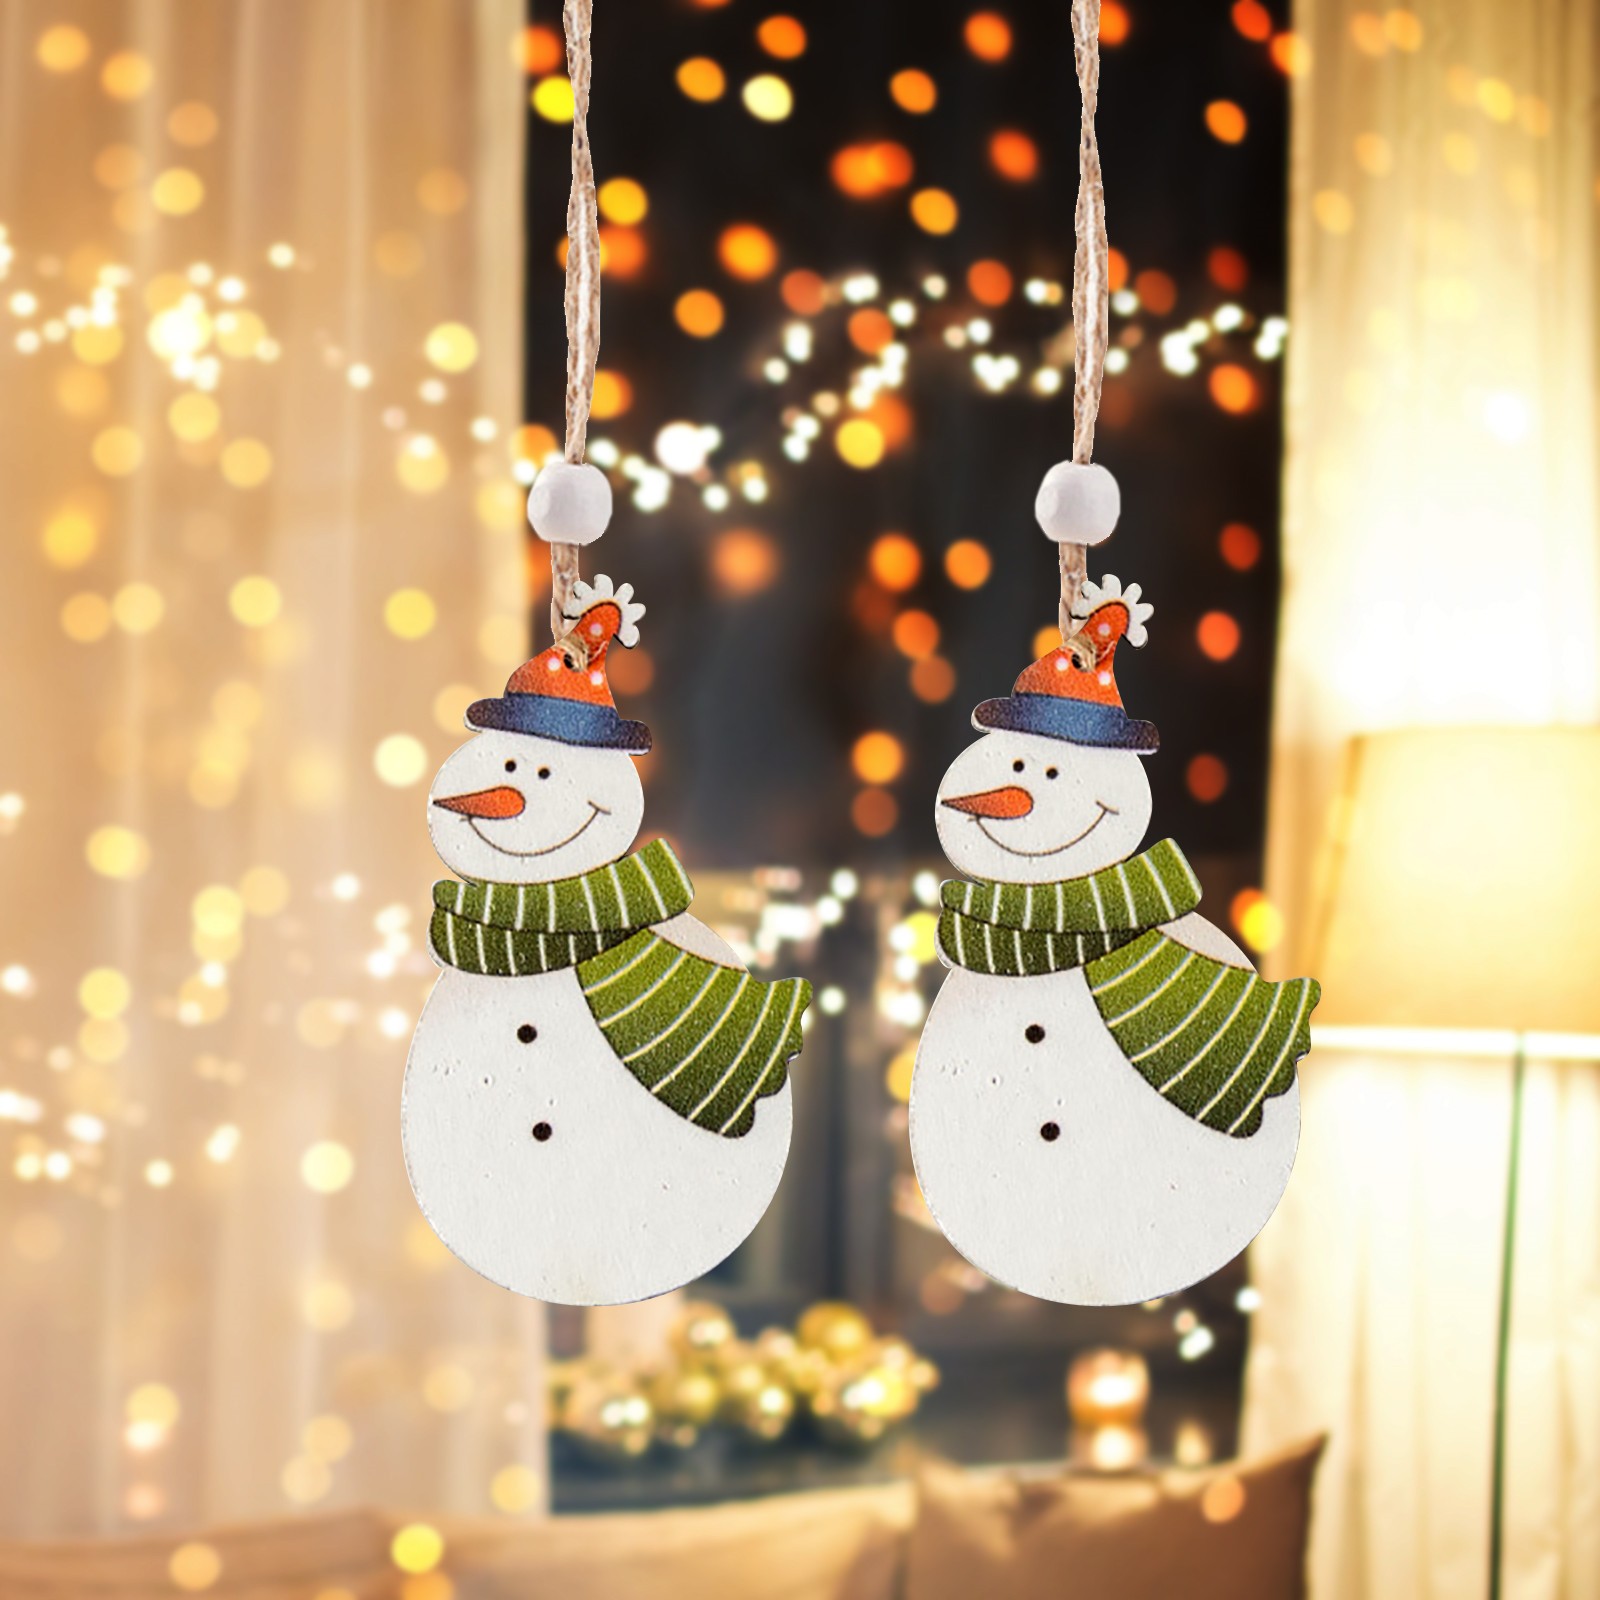 Christmas Tree Decorations Hanging Pendants Suitable For Christmas Family Party Holiday Decorations